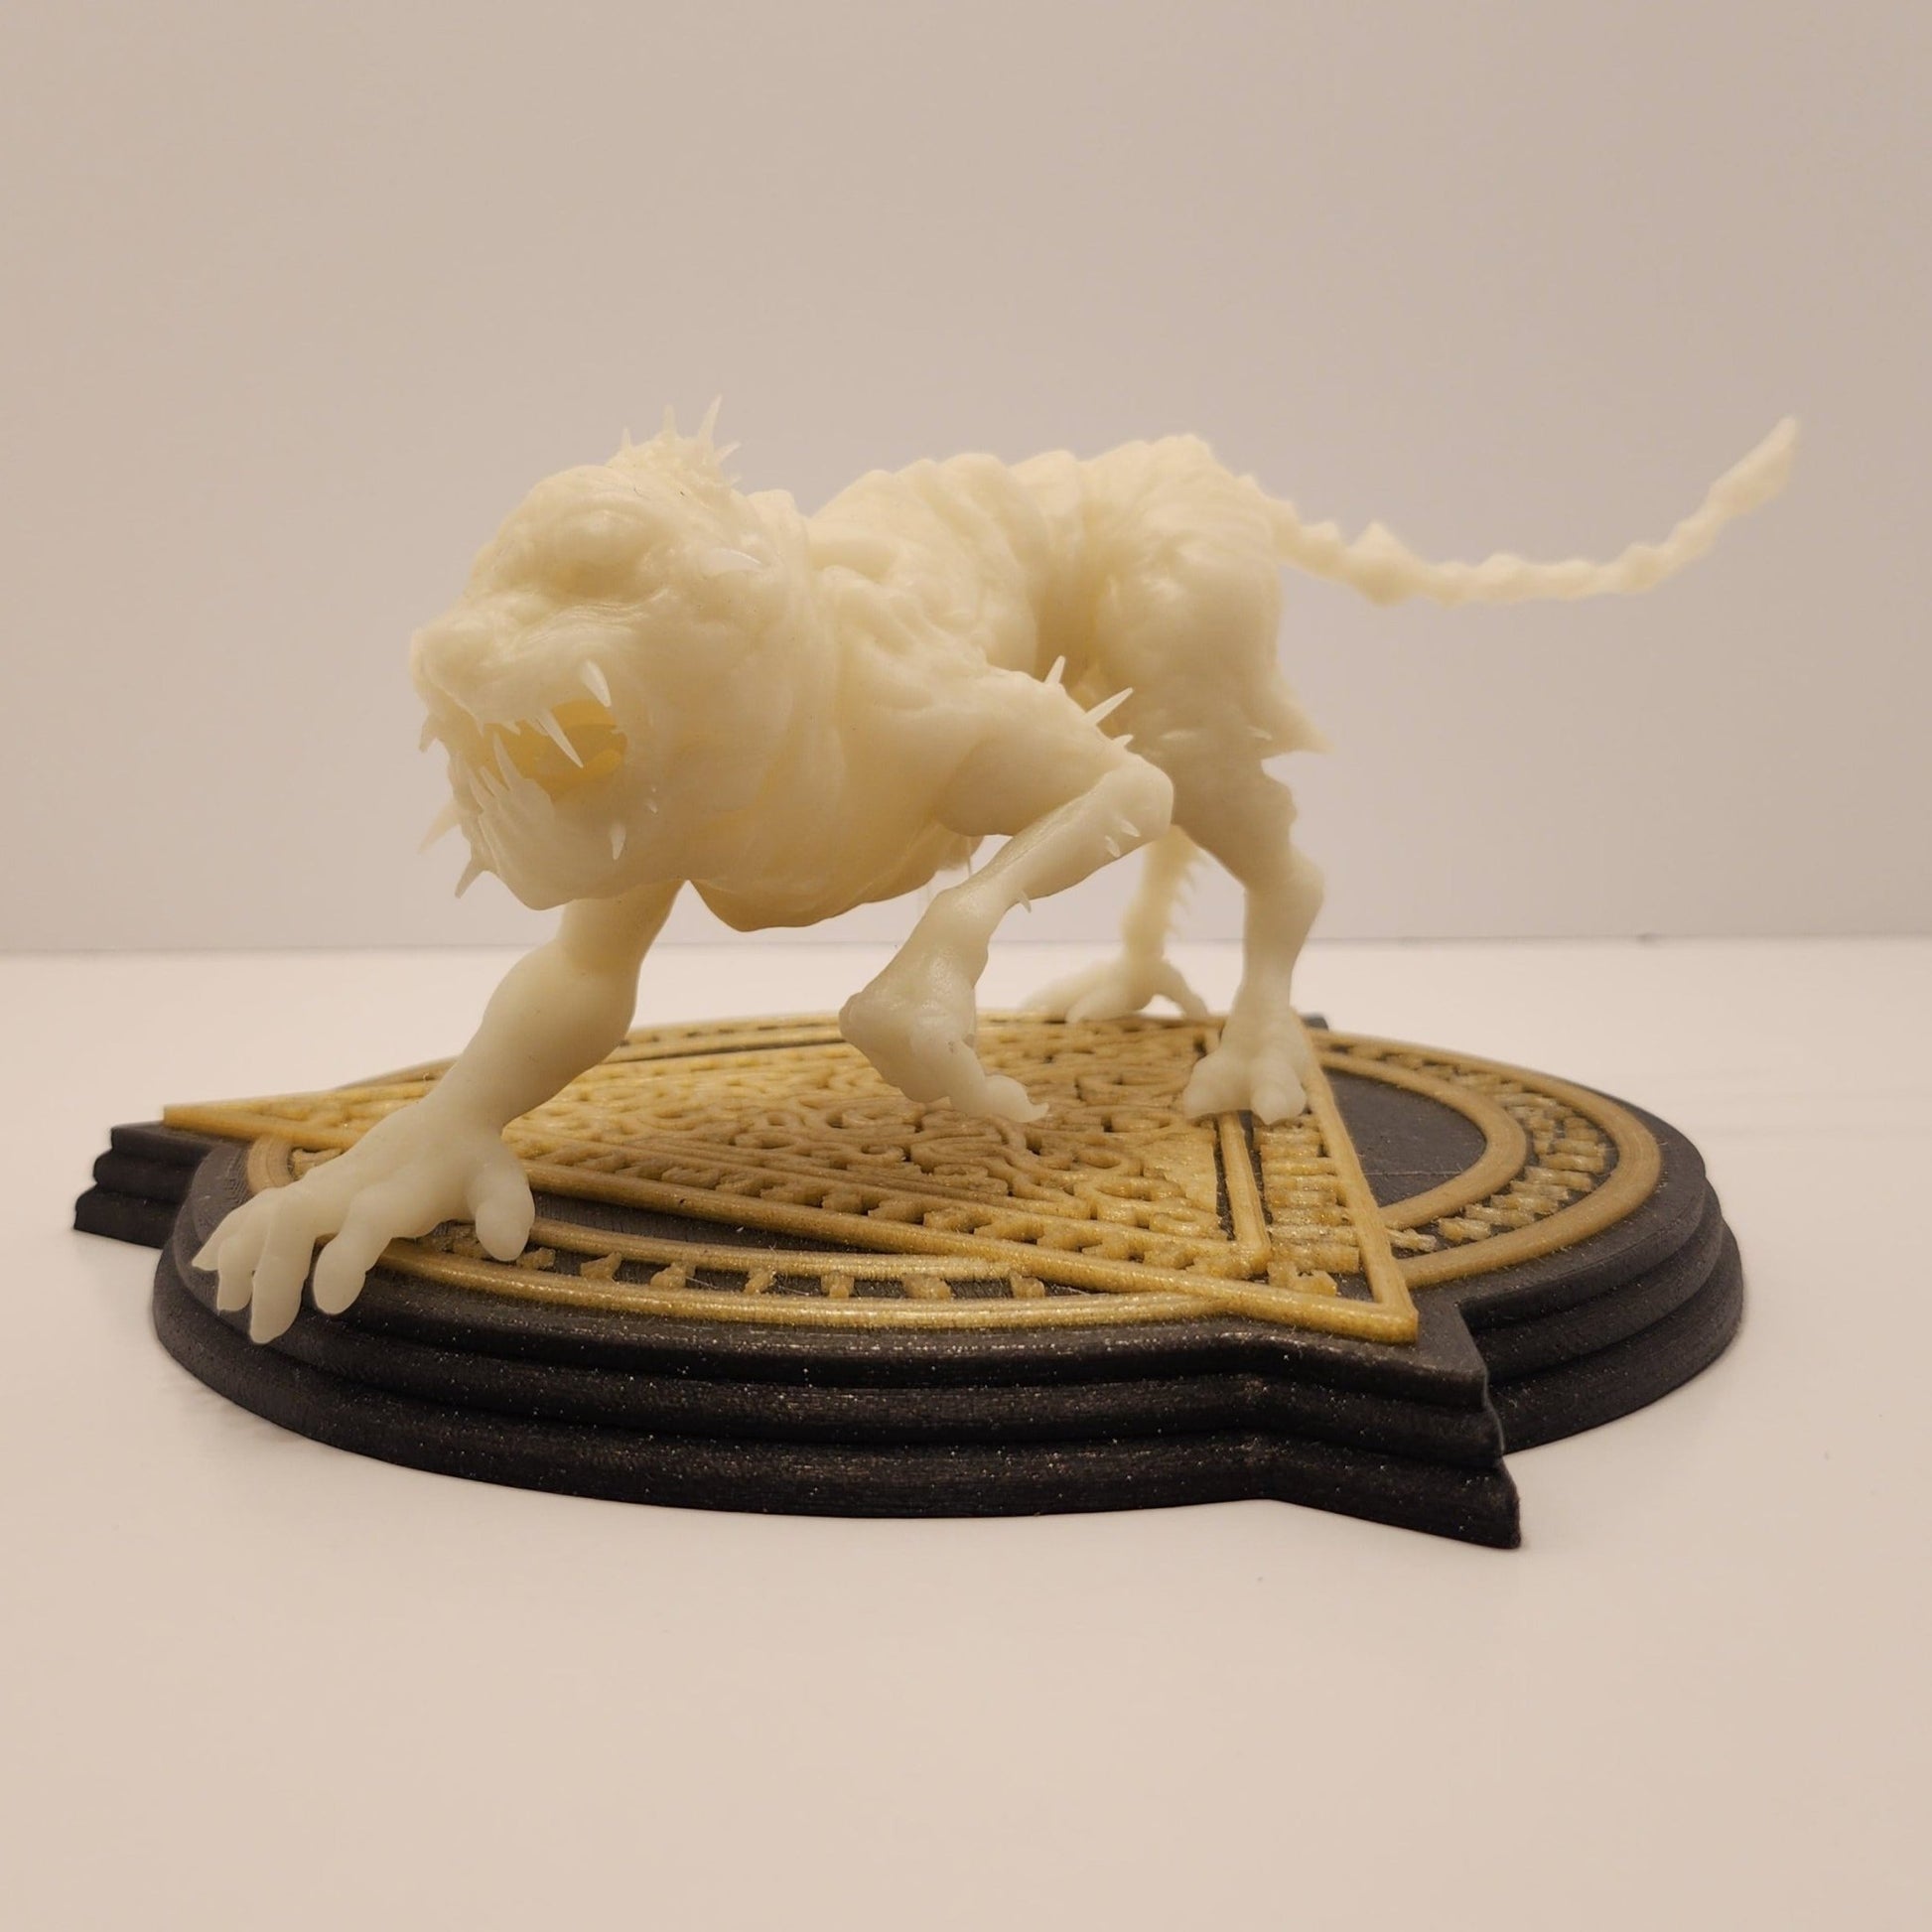 Dare to Unleash the Terror: The 3D Printed Glow-in-the-Dark Dog Monster from "The Last Rite" - Spectral Ink Shop - Figurine -